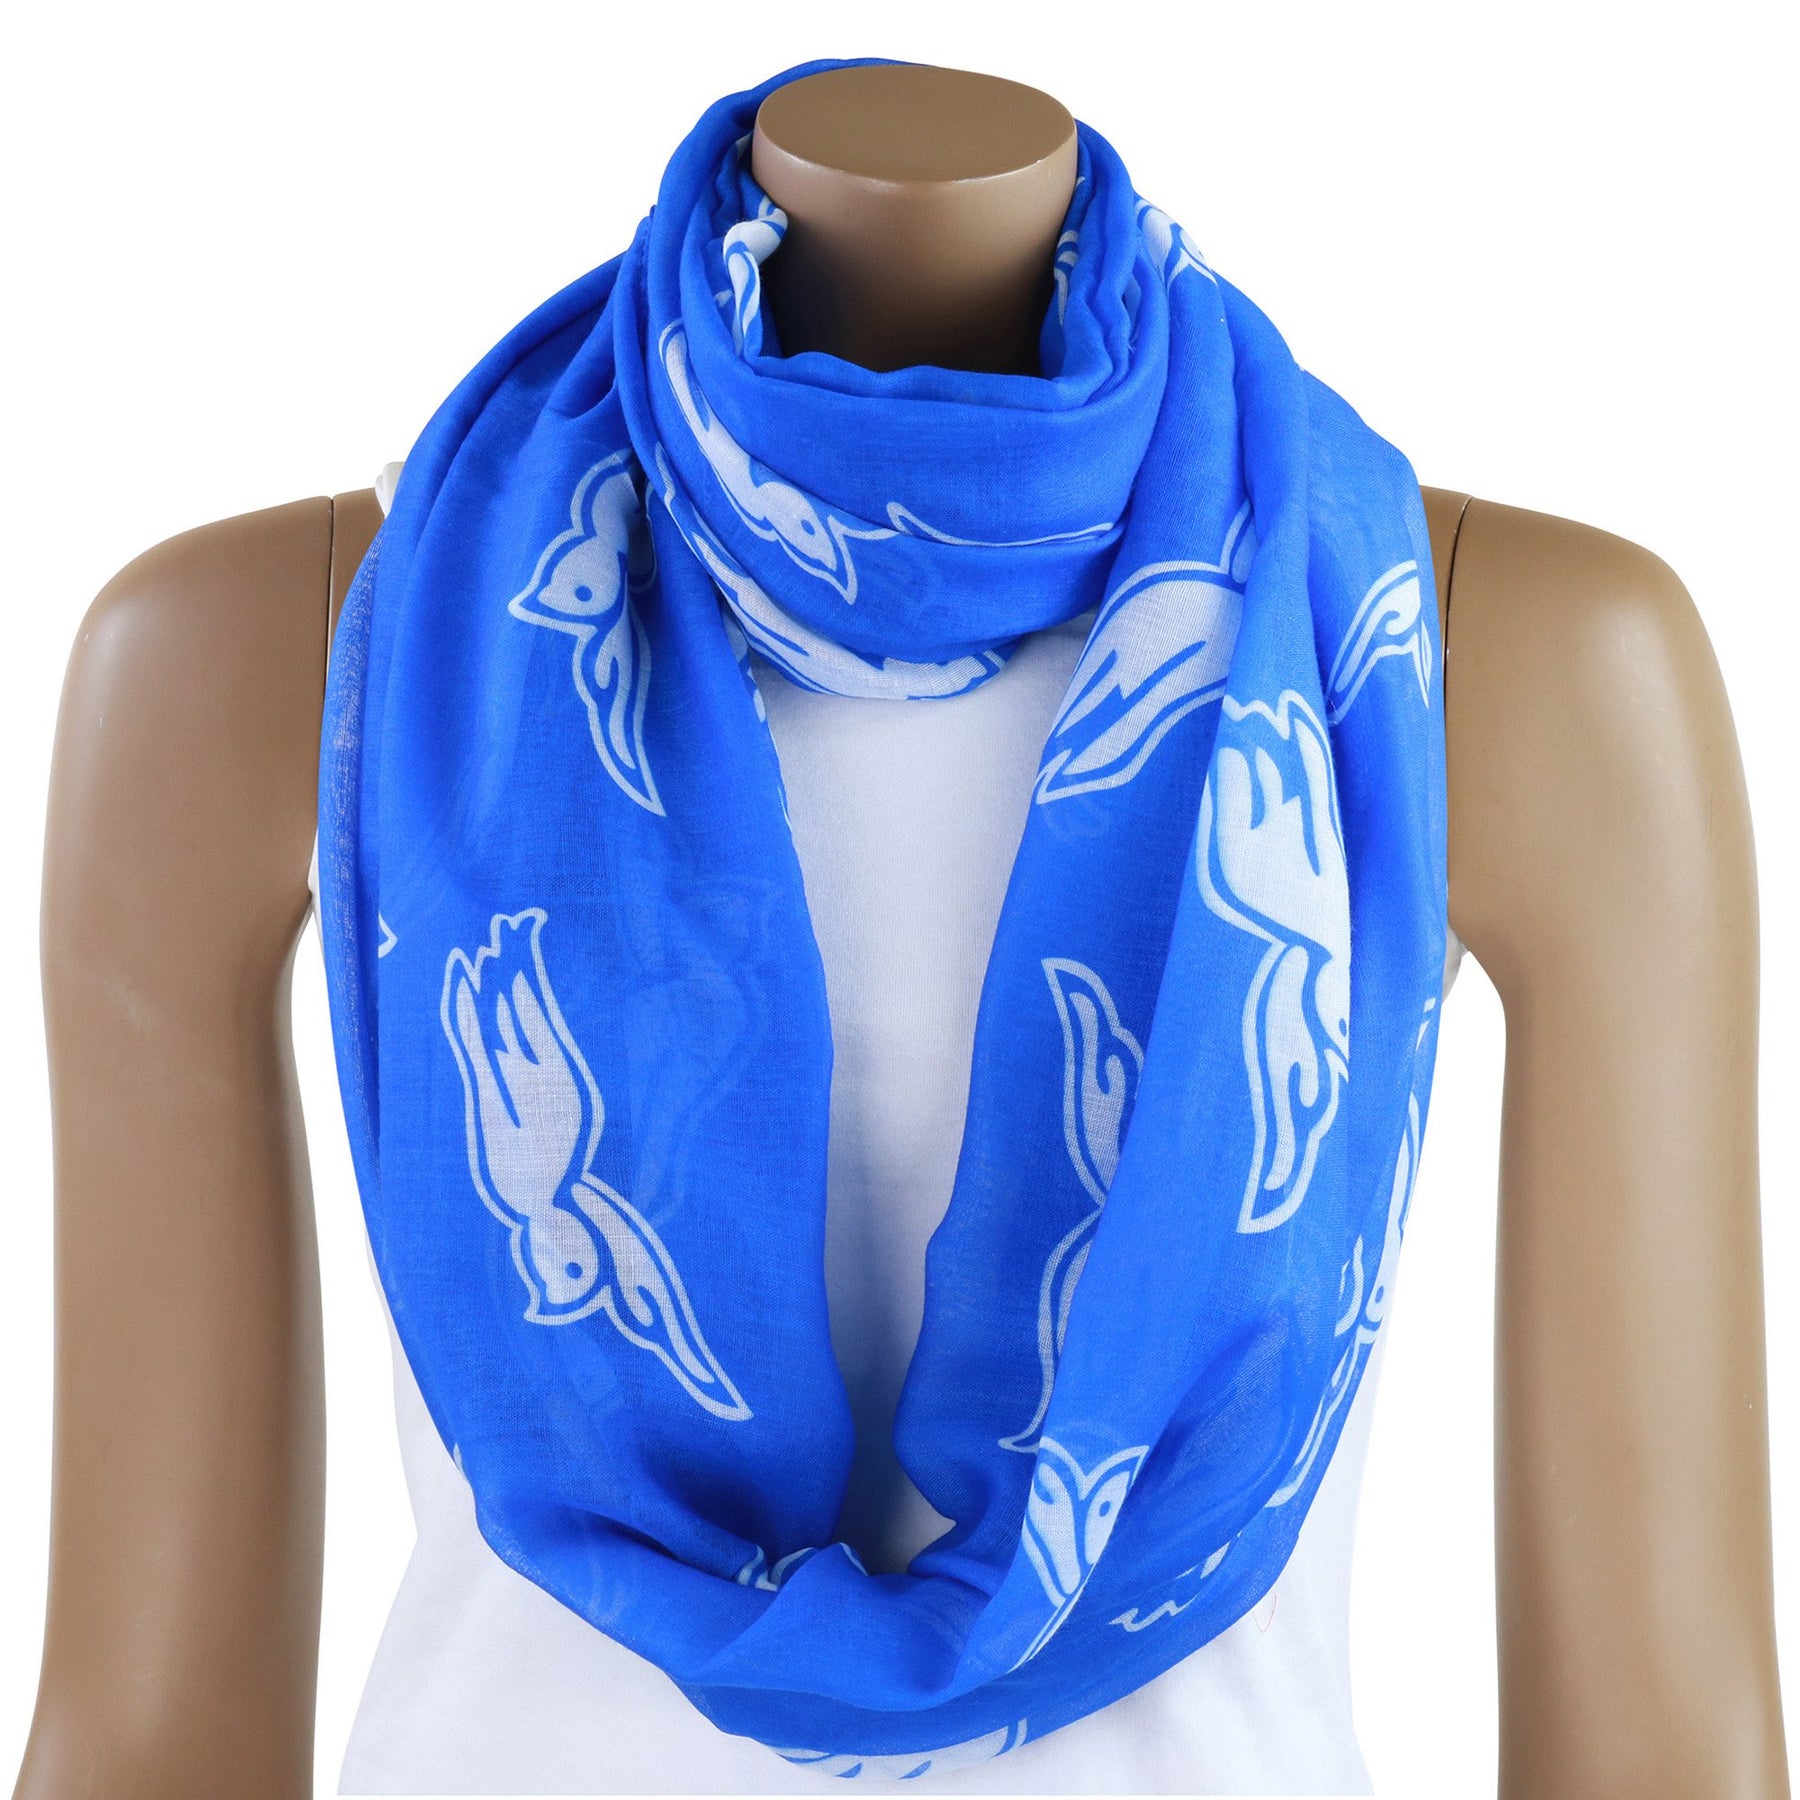 2 of 3: Dove Infinity Scarf-Scarf-Divine Nine Depot-Royal Blue-43x32 inches-The Black Art Depot